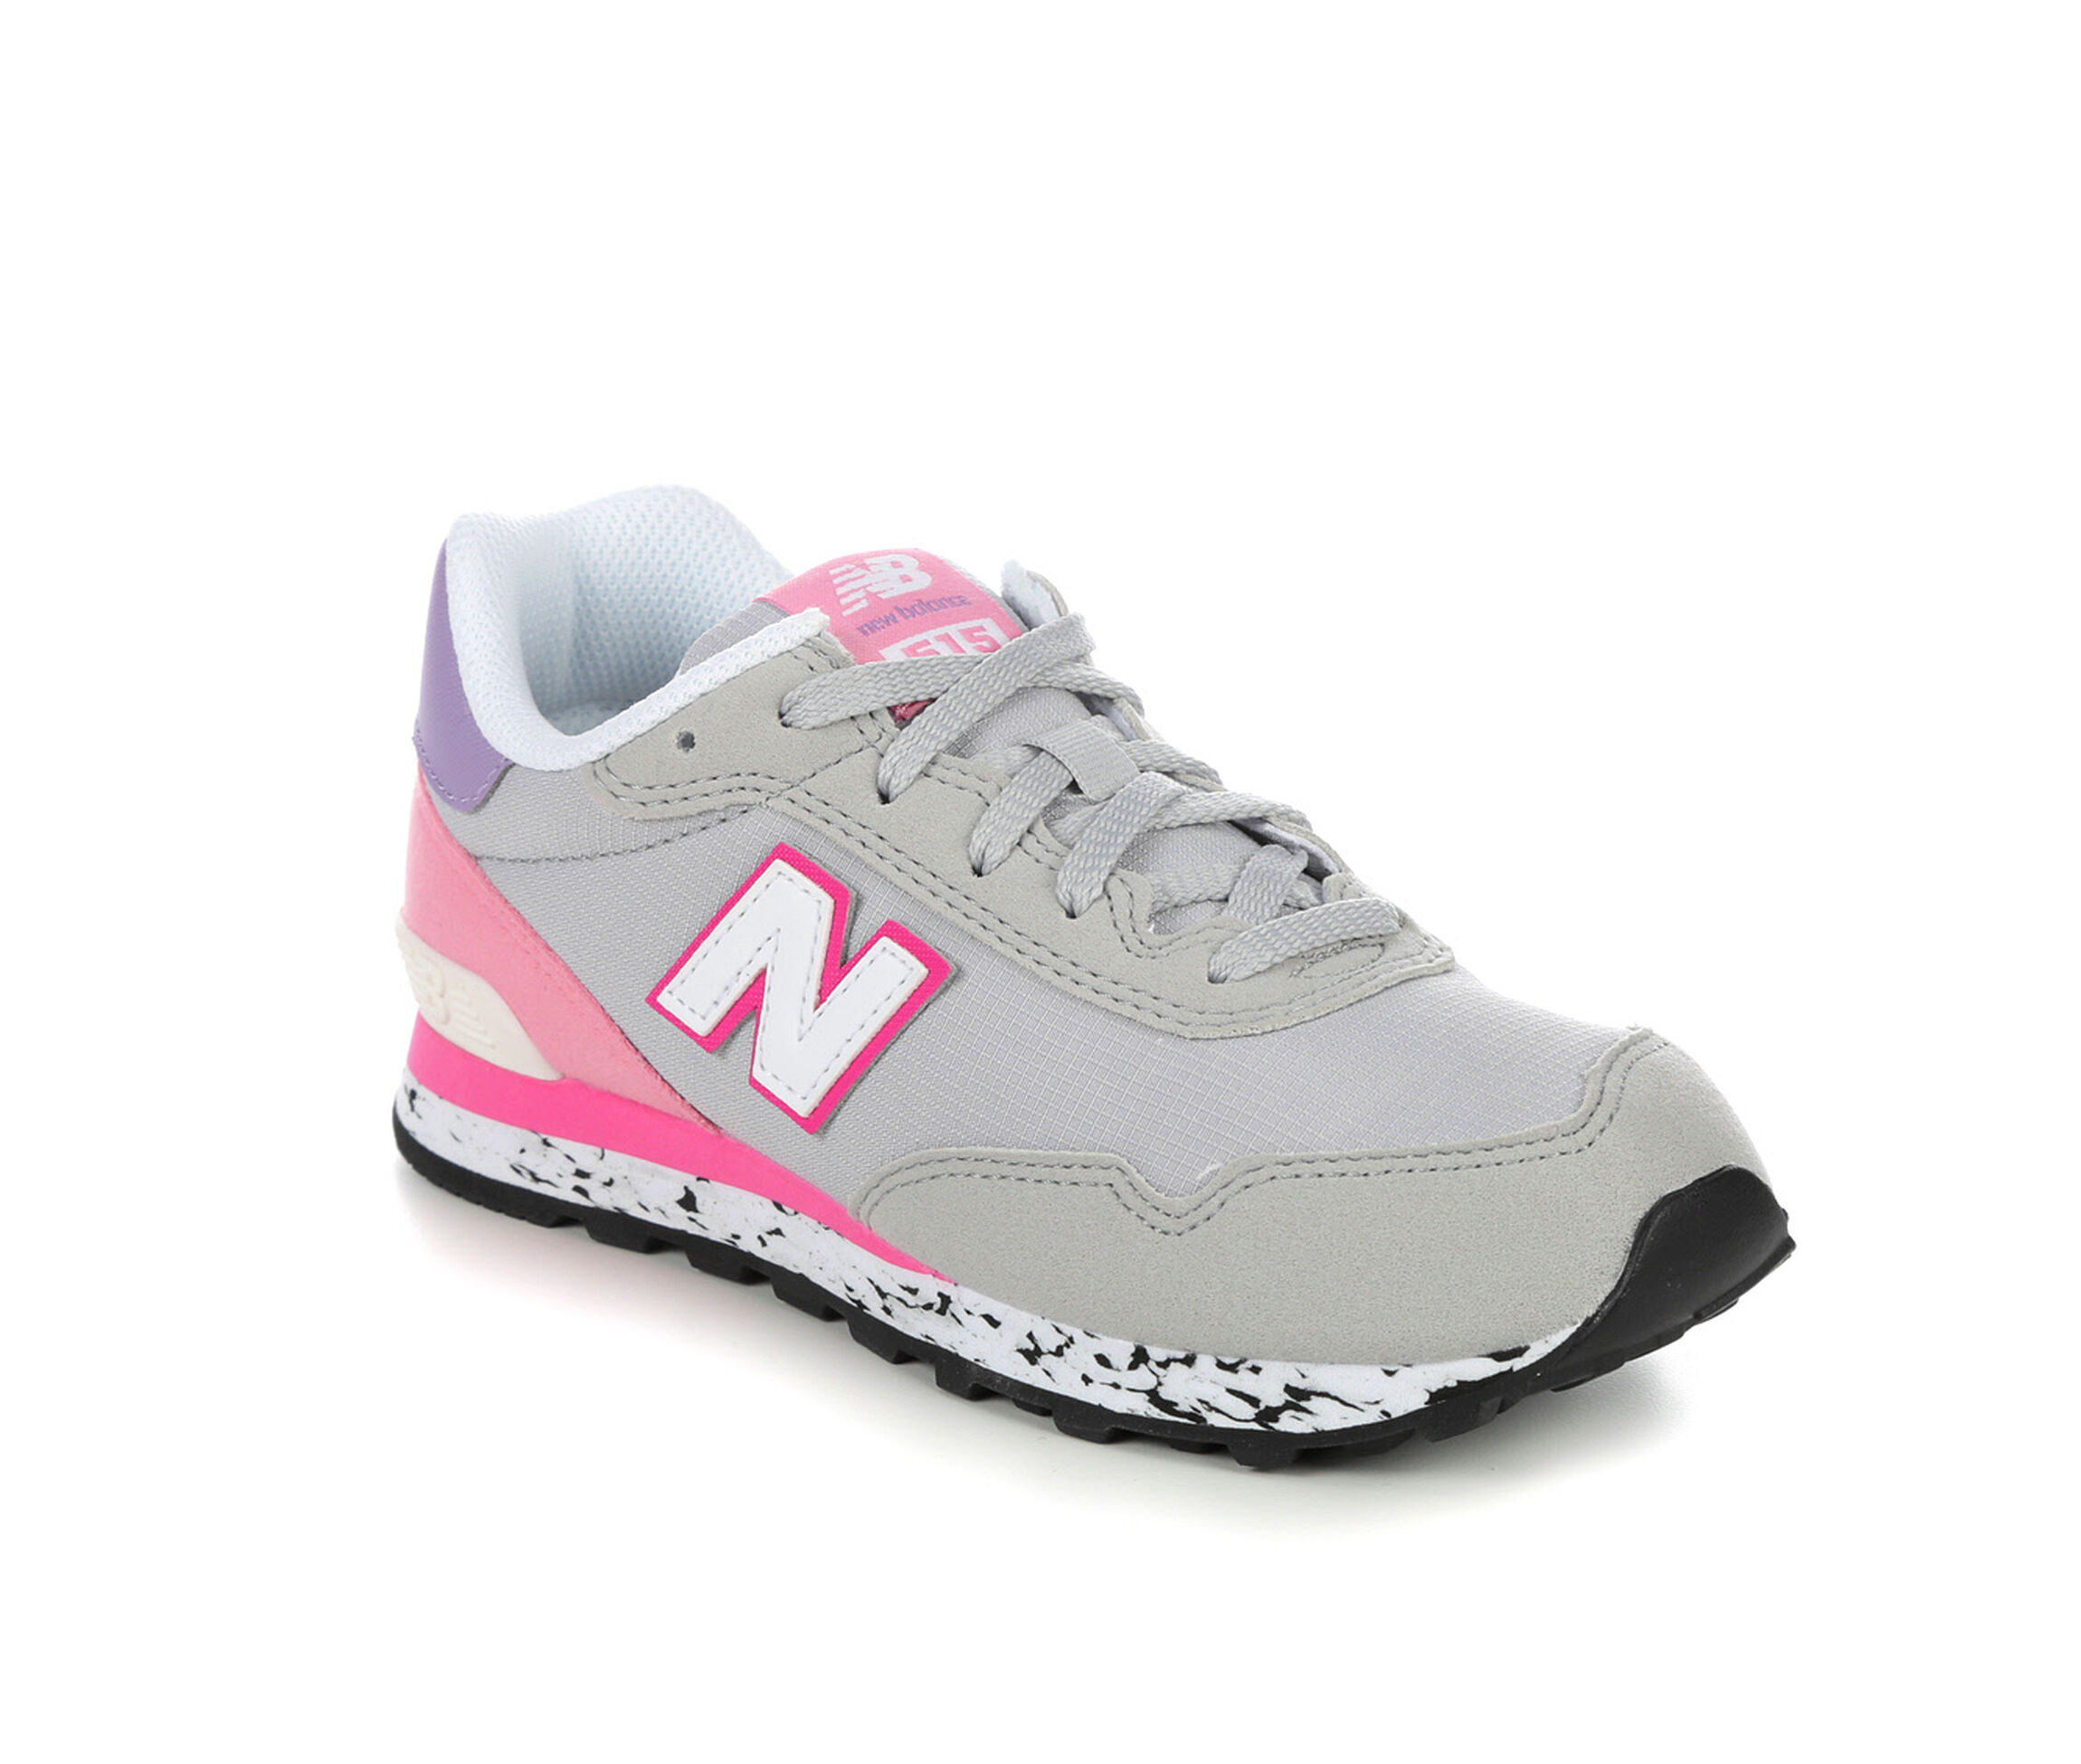 New Balance Shoes & Sneakers | Shoe Carnival